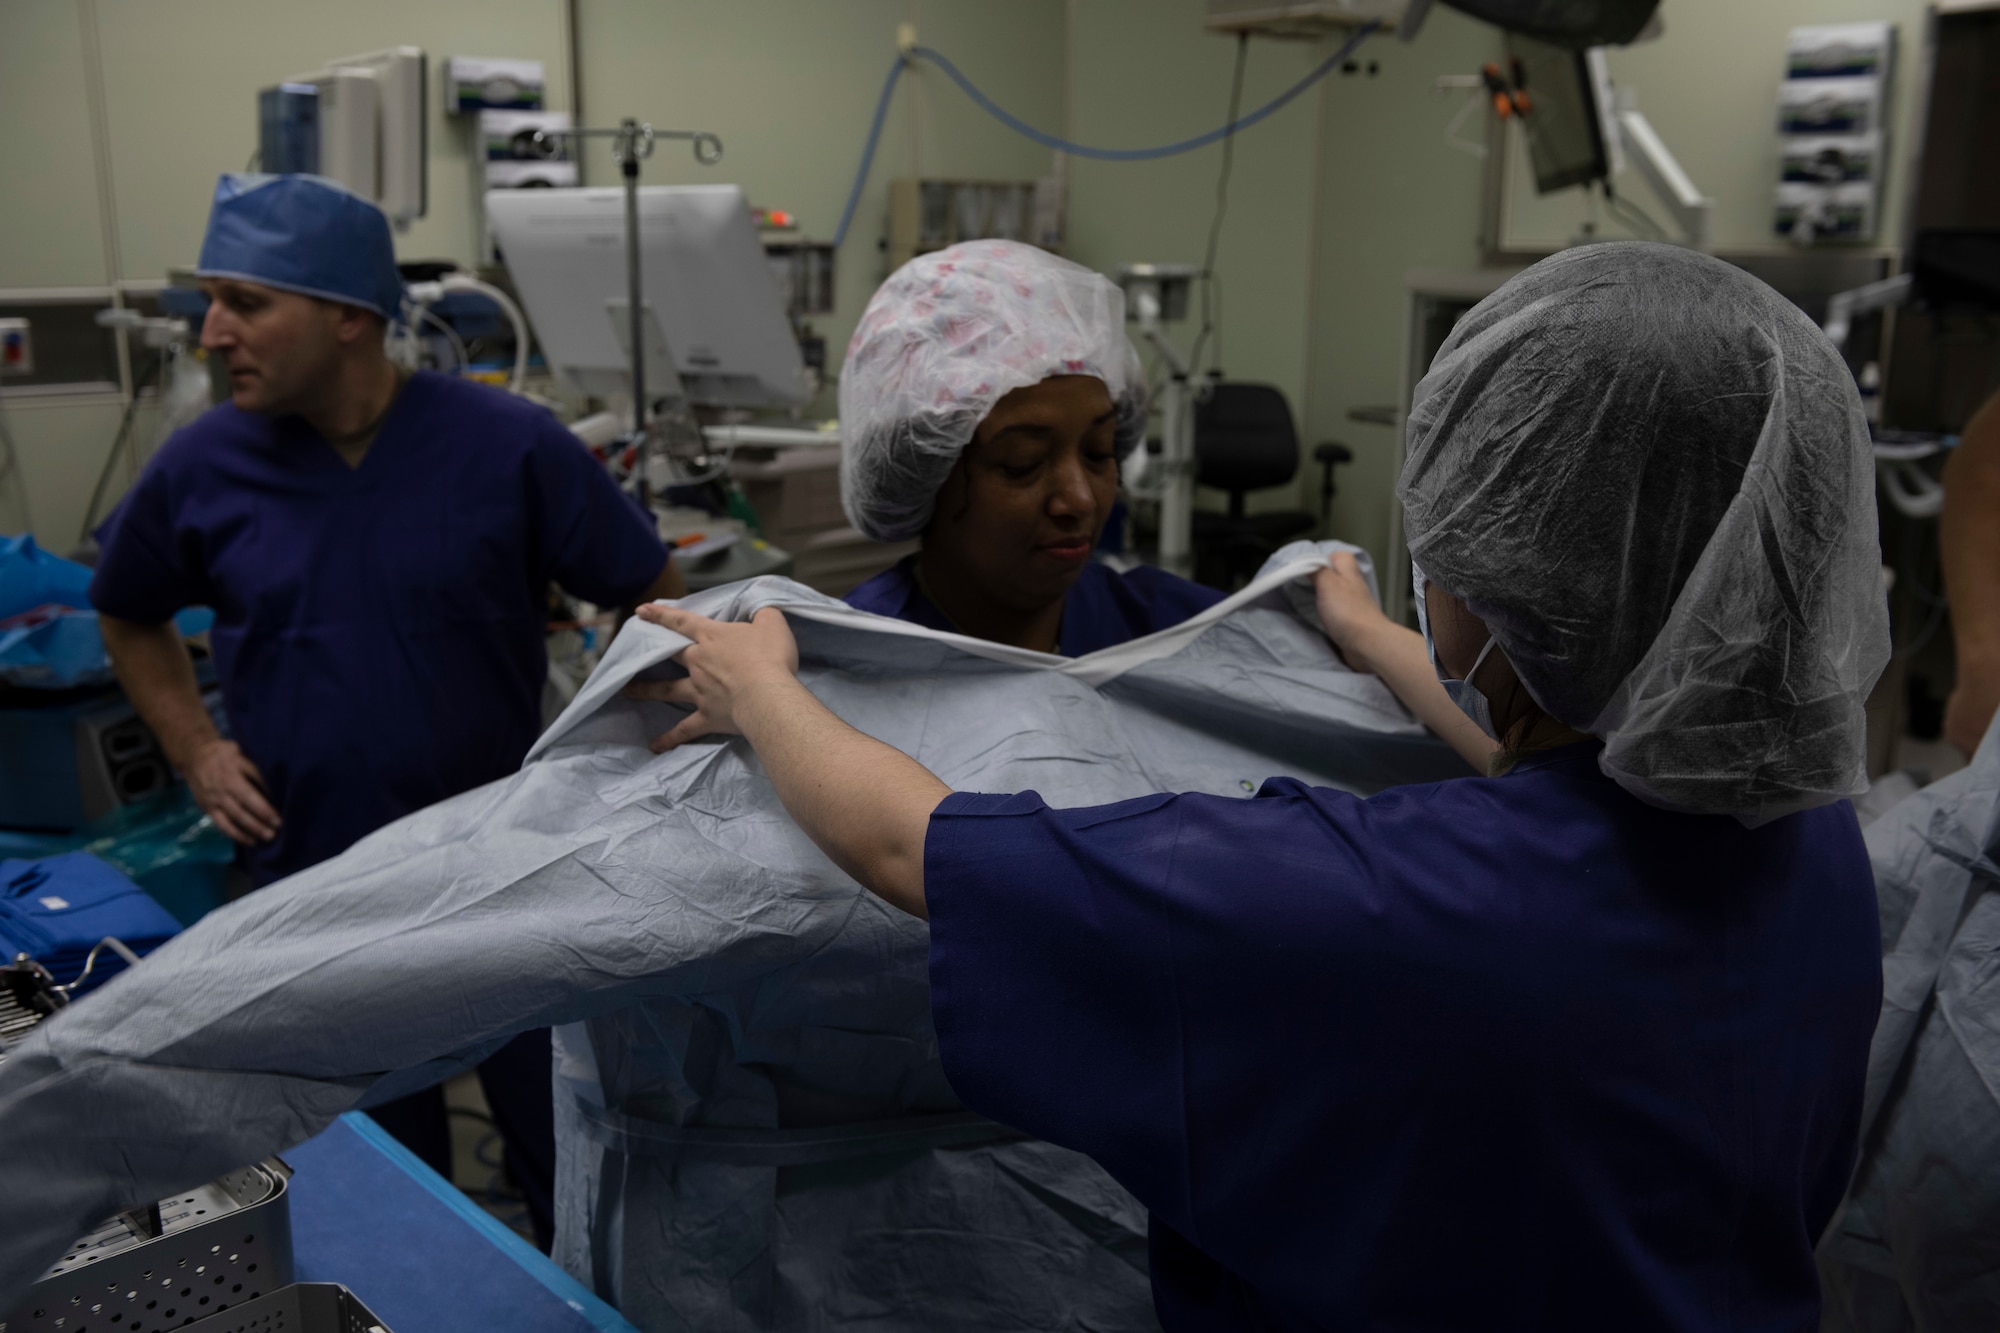 A military member puts on a surgical apron during a tour